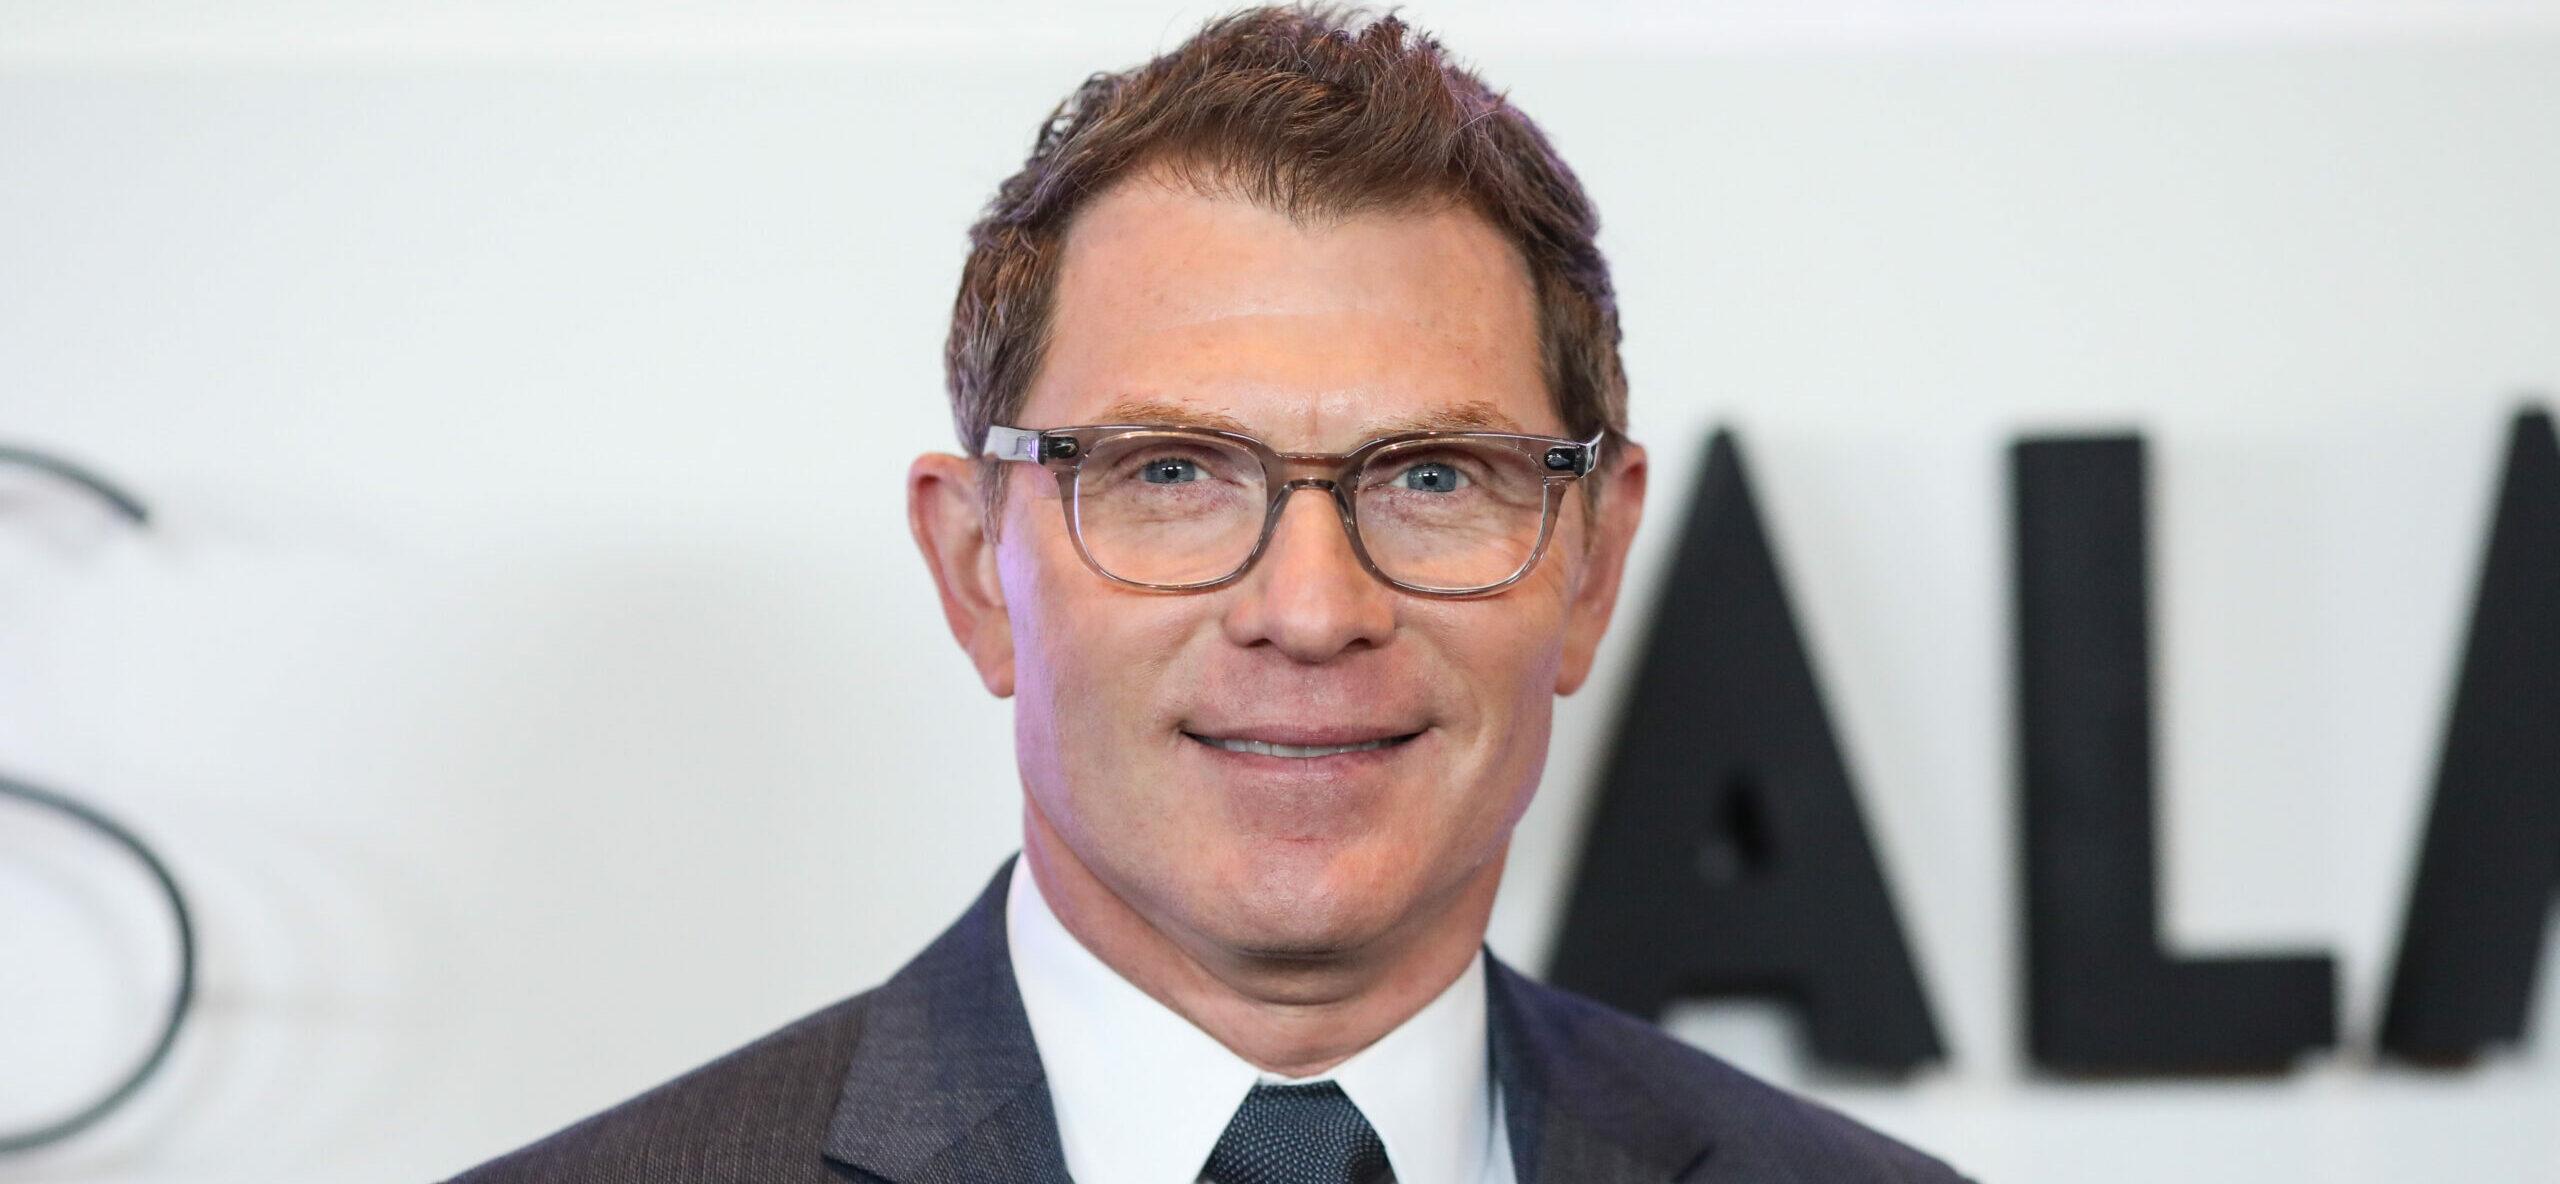 Bobby Flay Reveals This Surprising ‘Go-To Ingredient’ He Always Has On Hand!